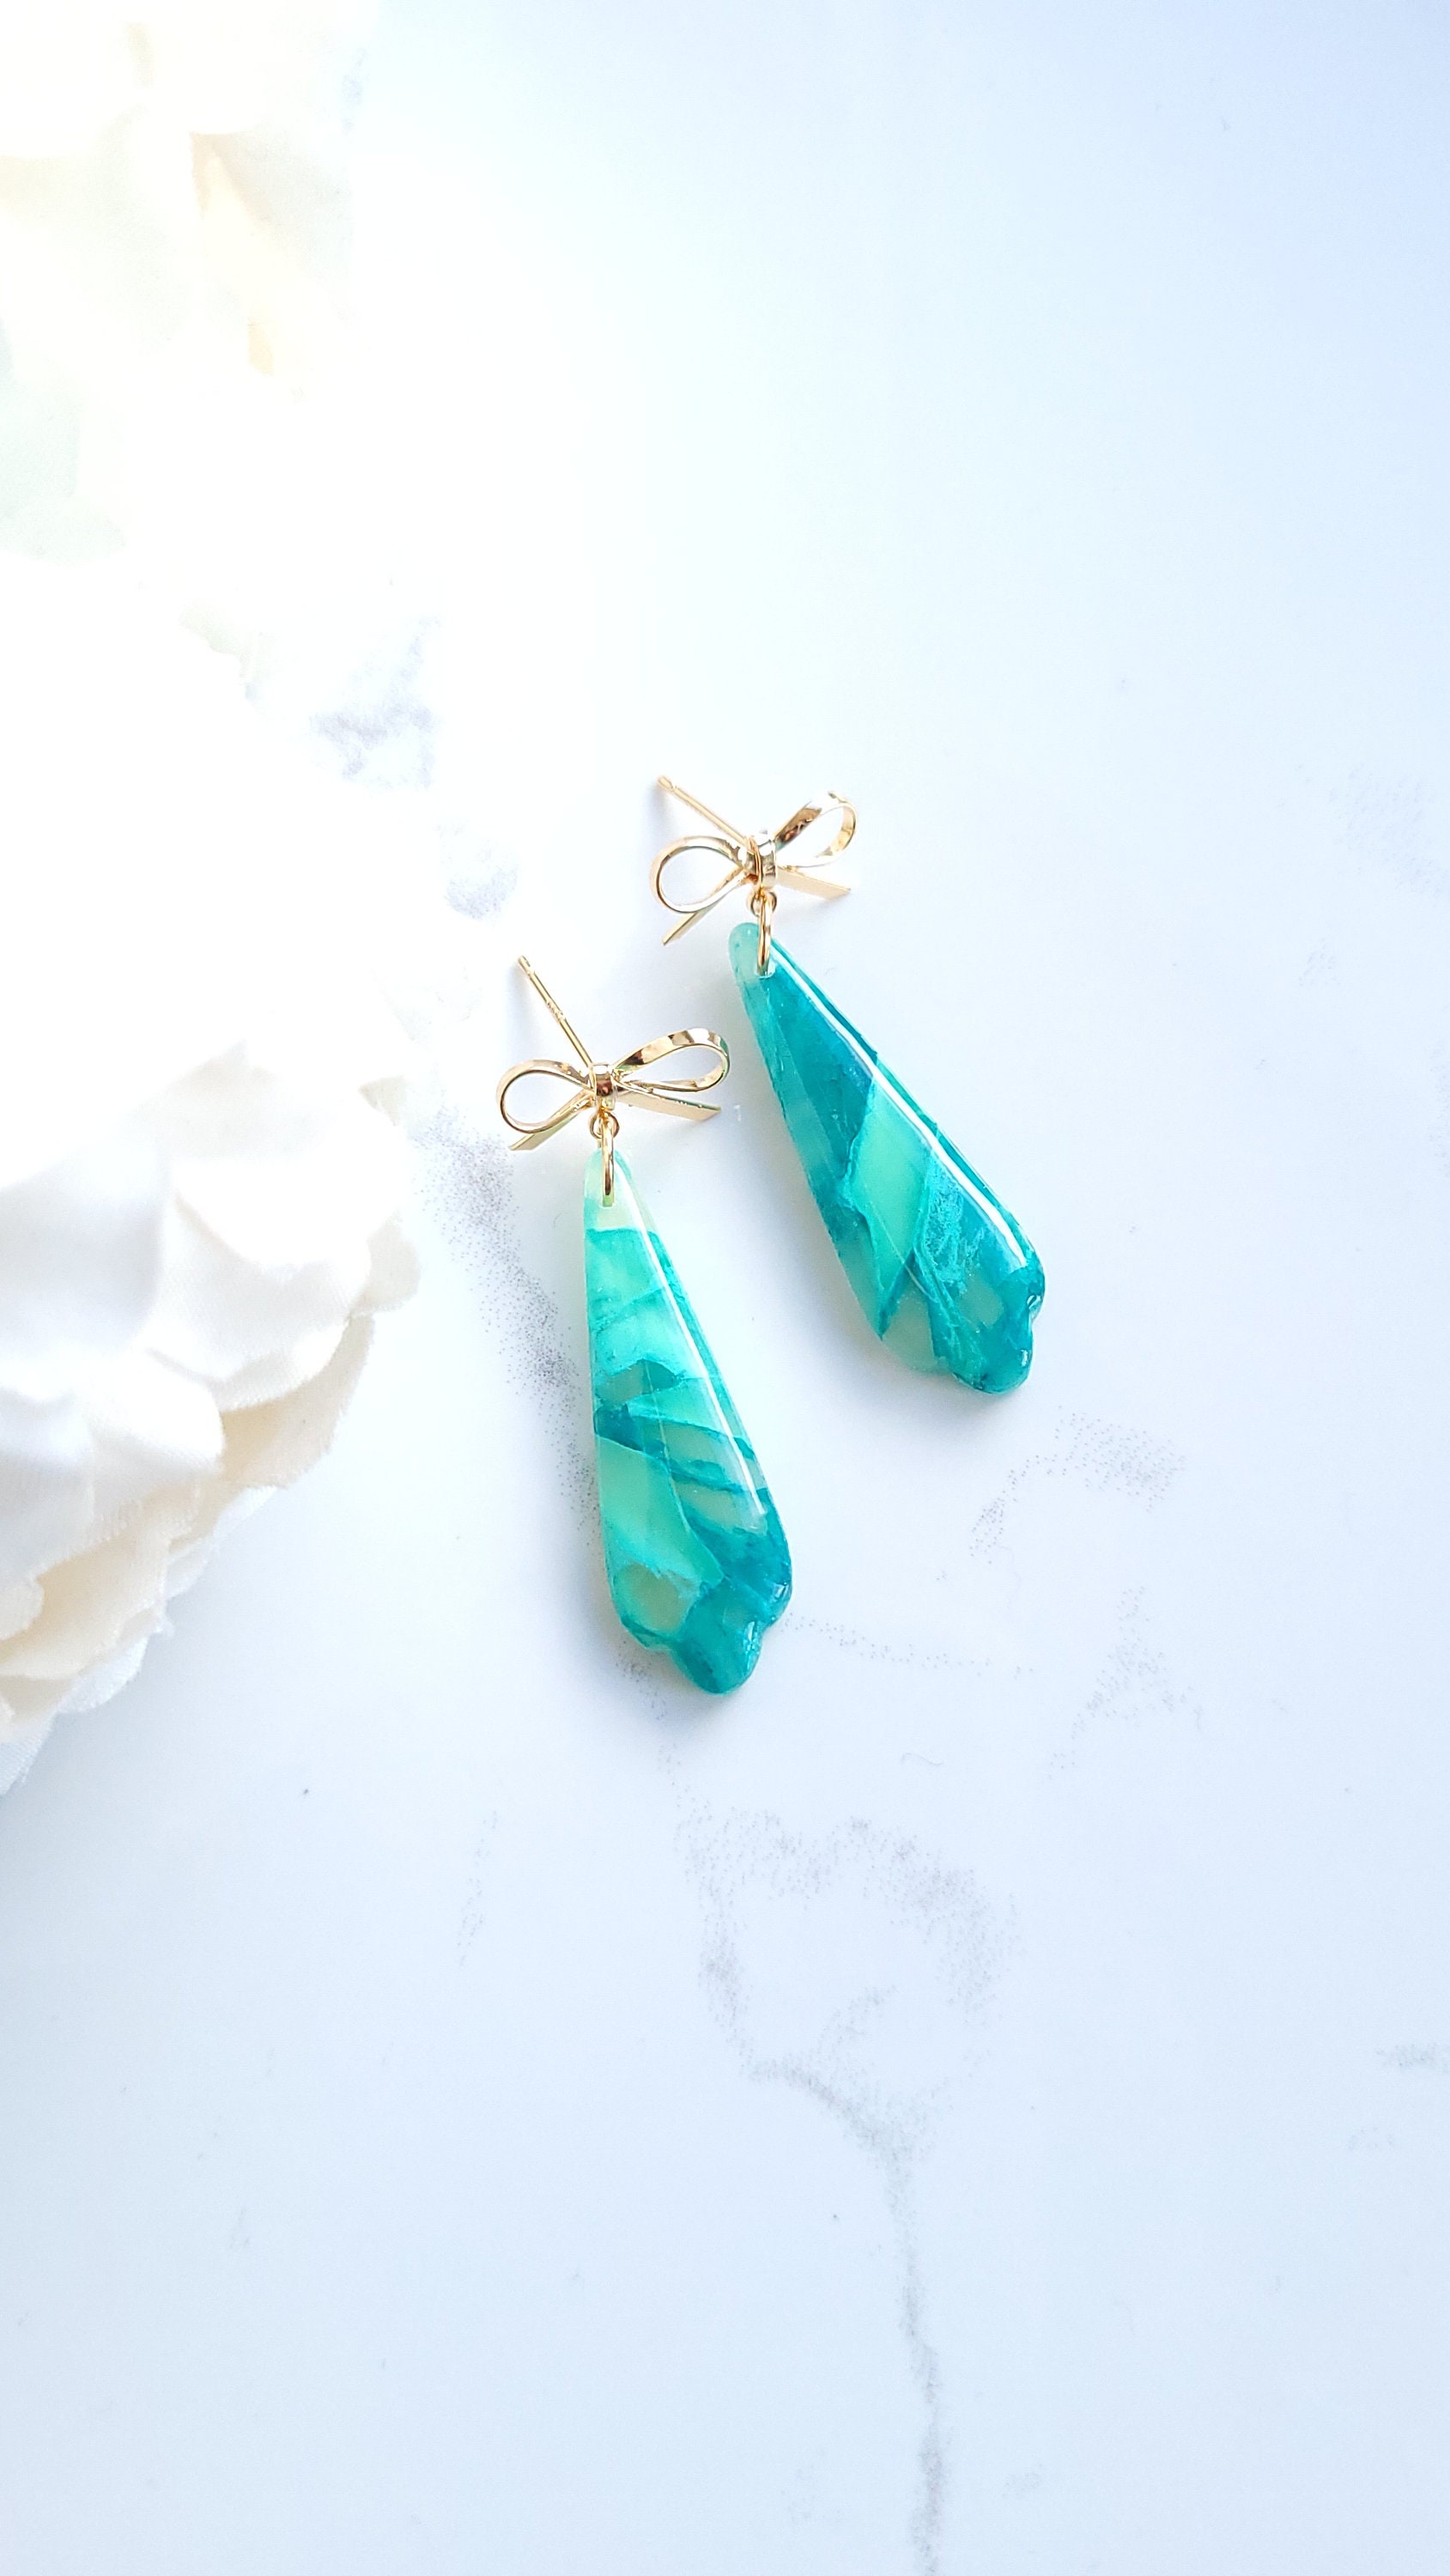 Turquoise & Teal Marble Translucent Earrings | Handmade Polymer Clay Statement Bow Dangle